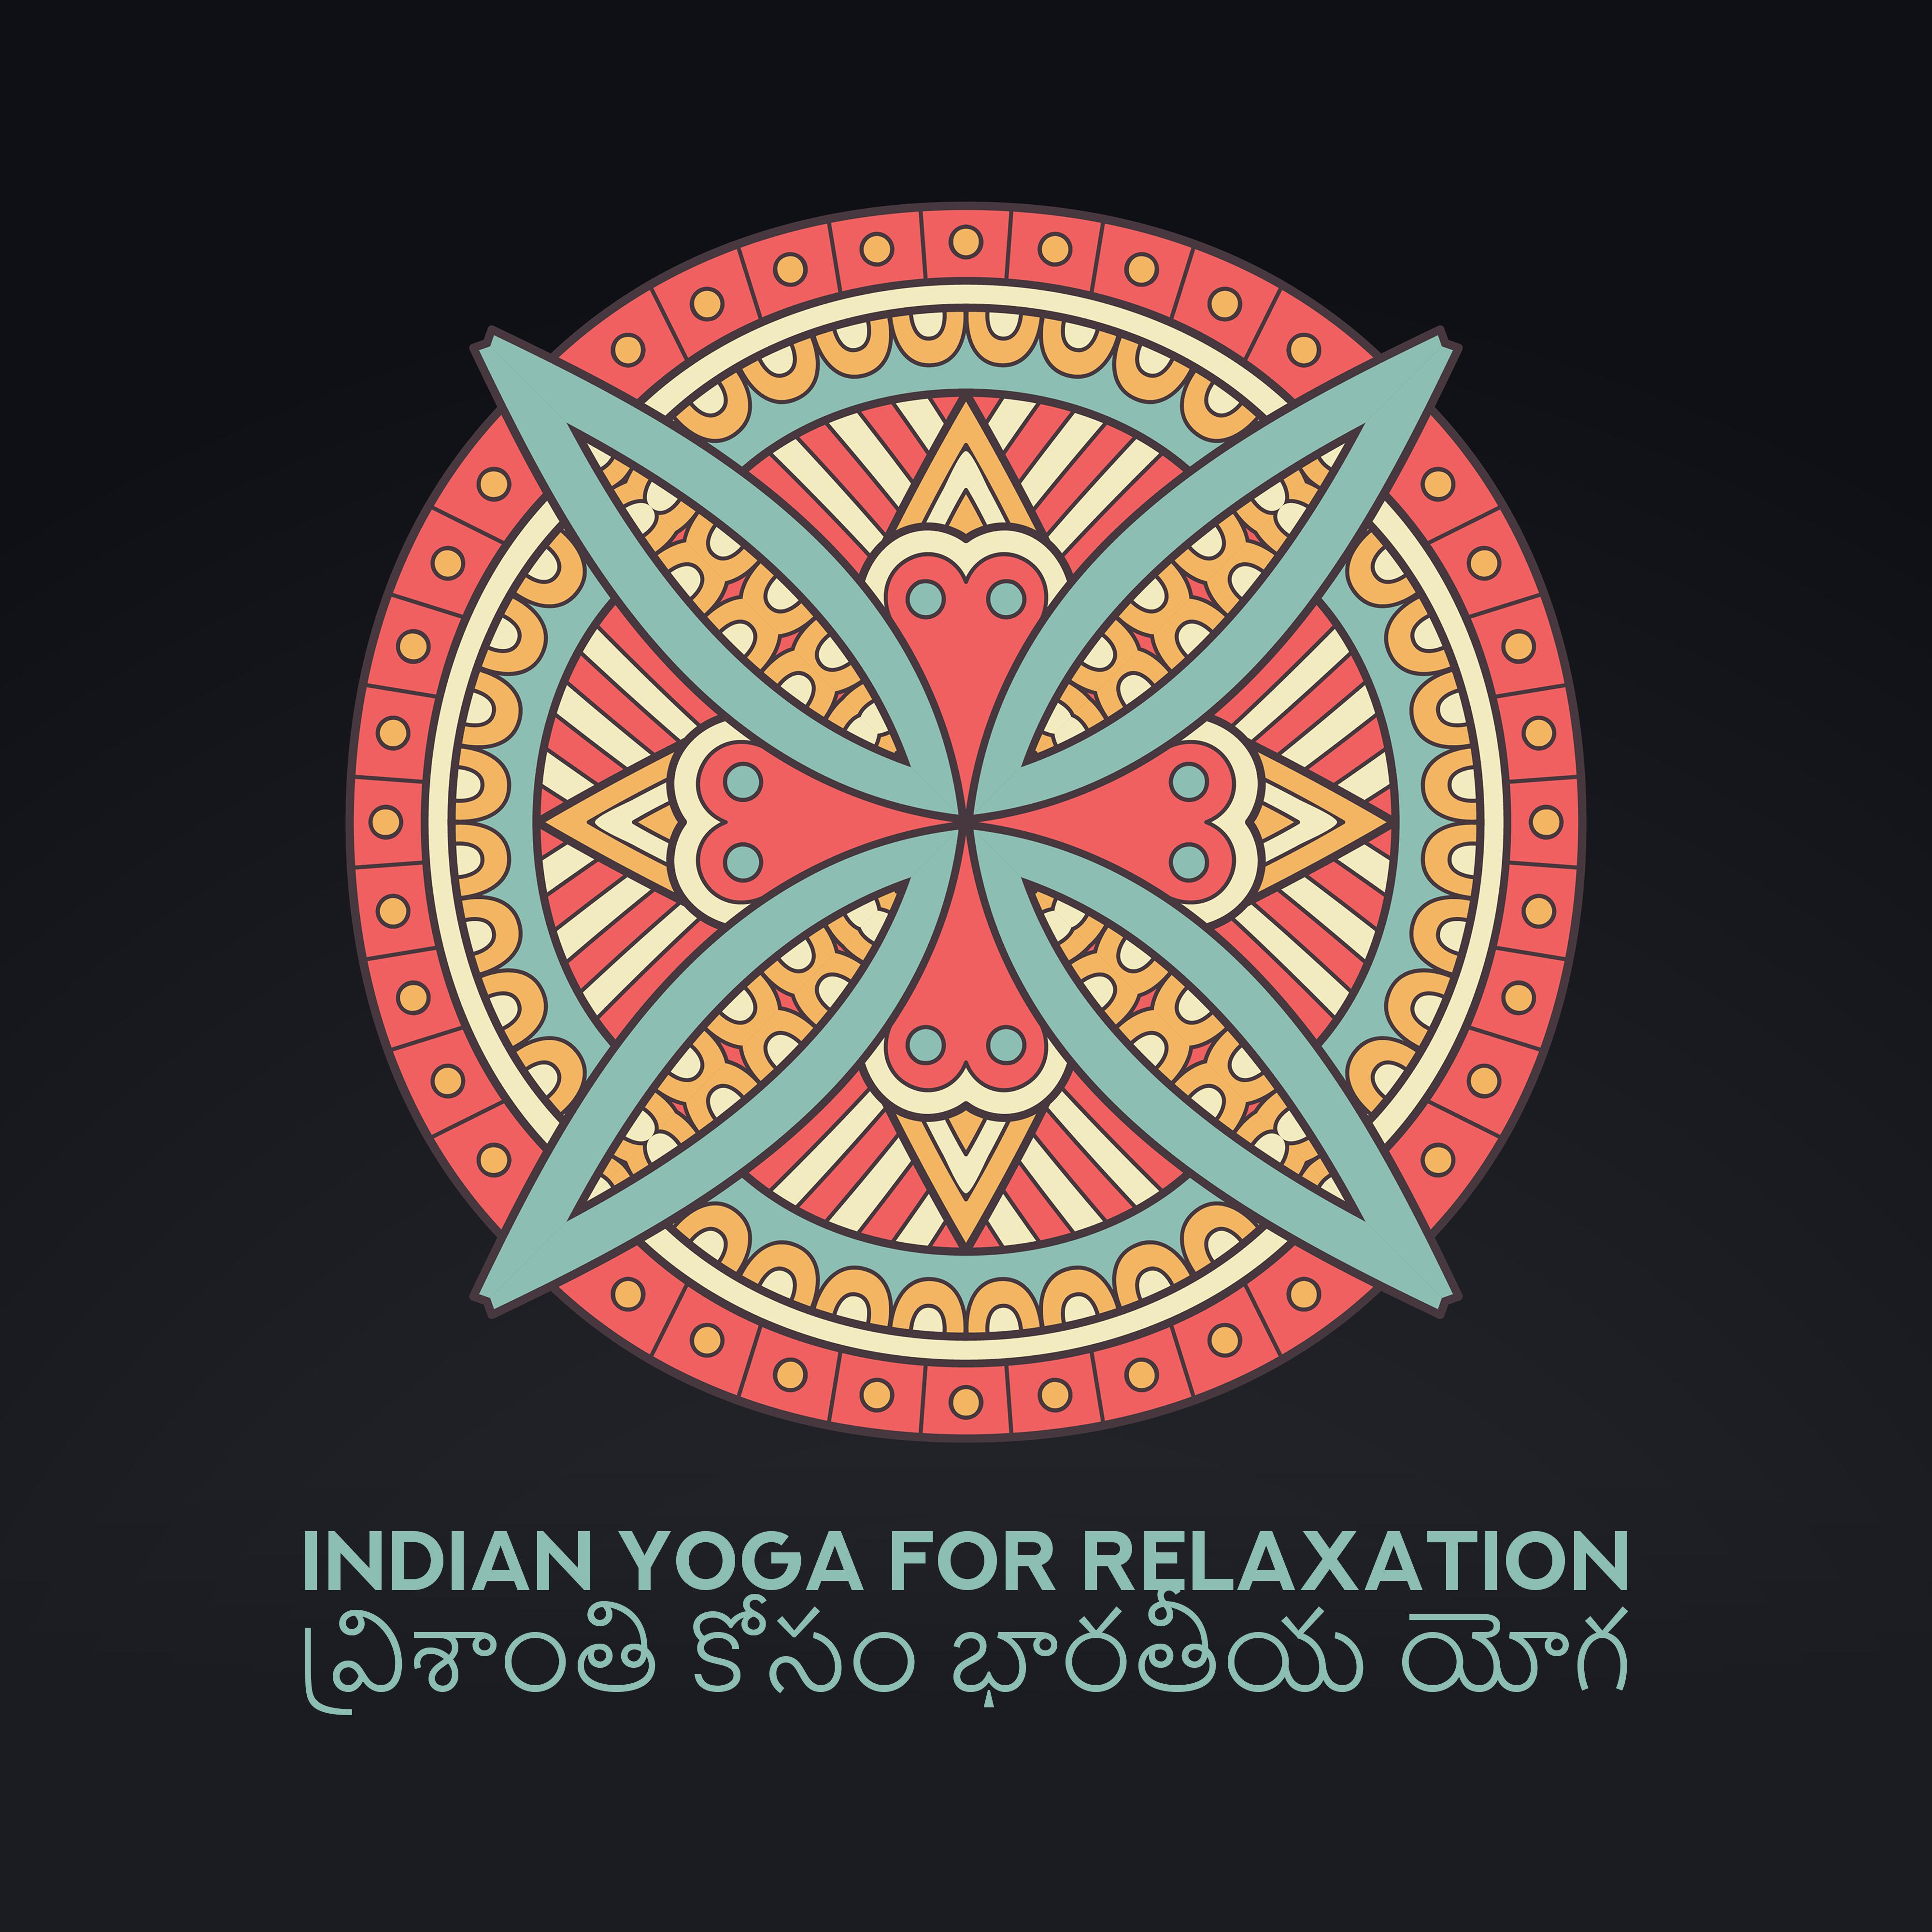 Indian Yoga for Relaxation